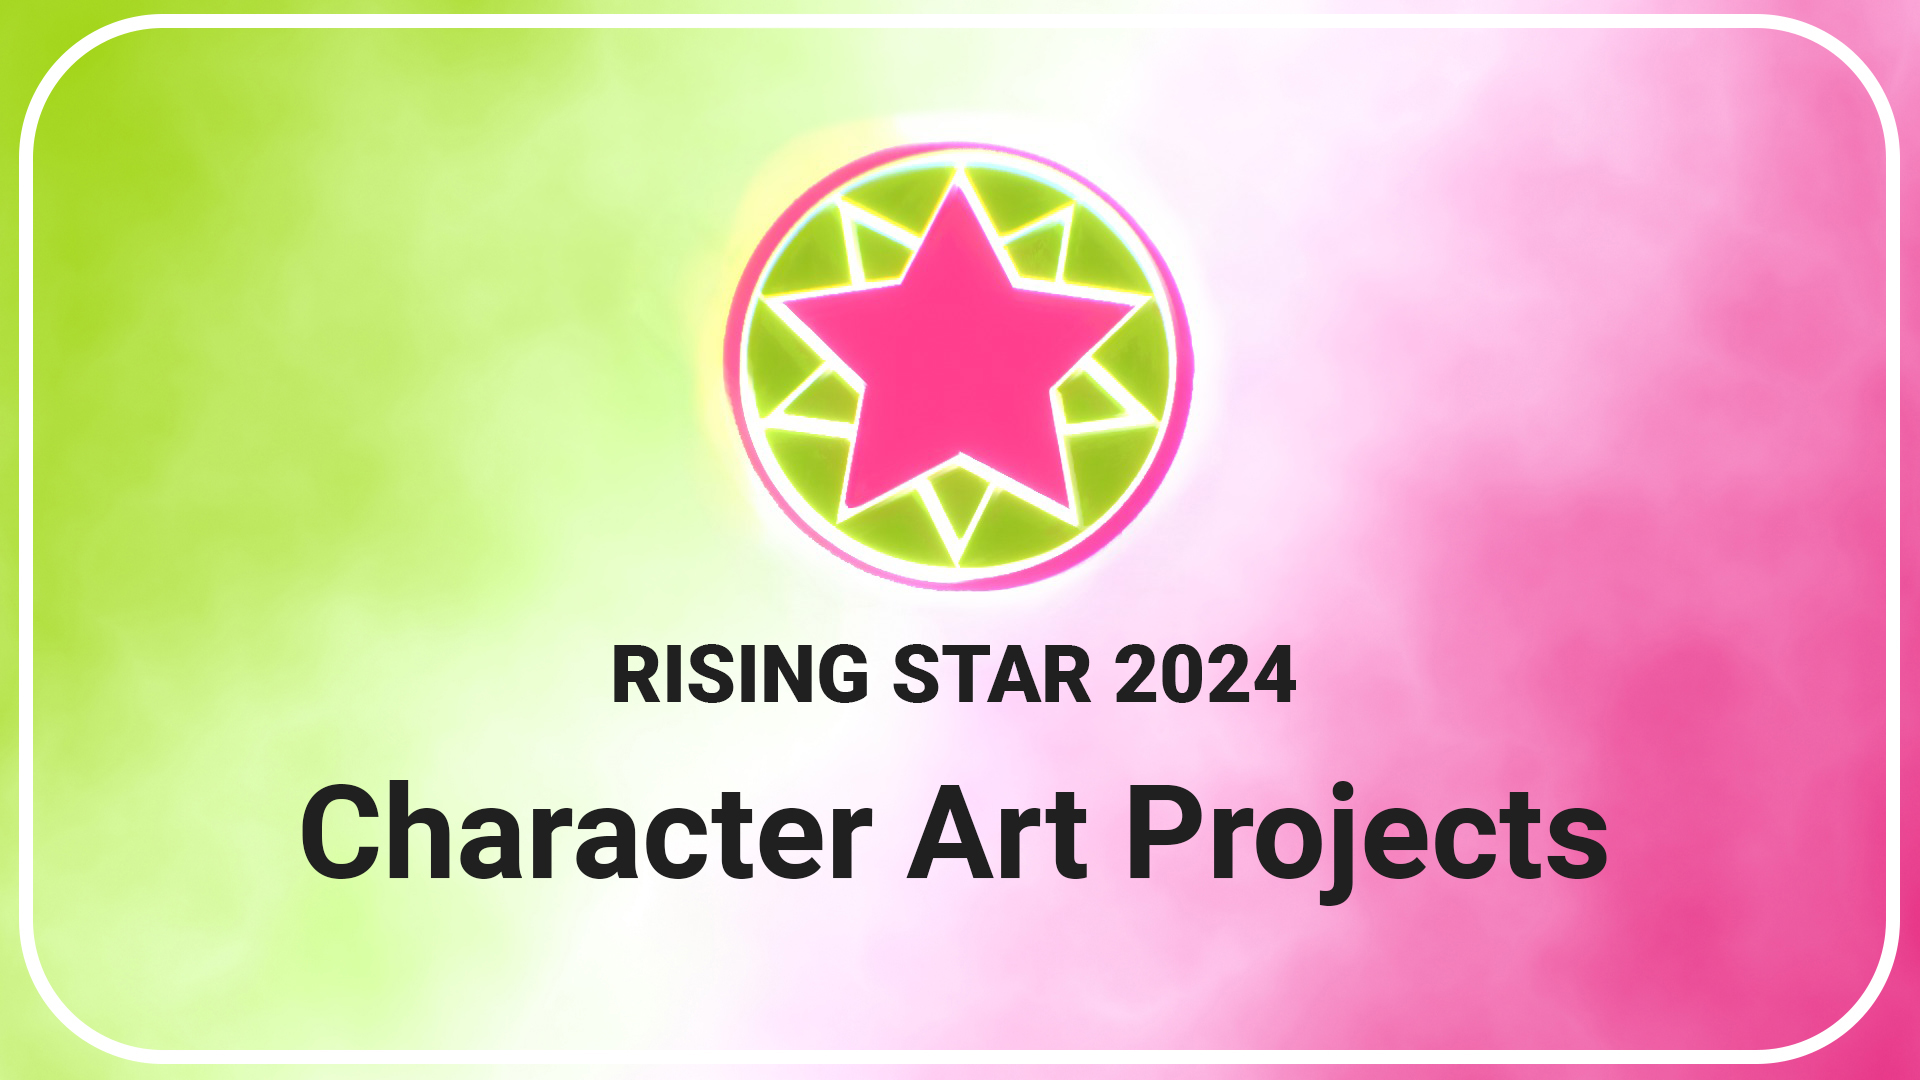 Character Art Projects | Rising Star 2024